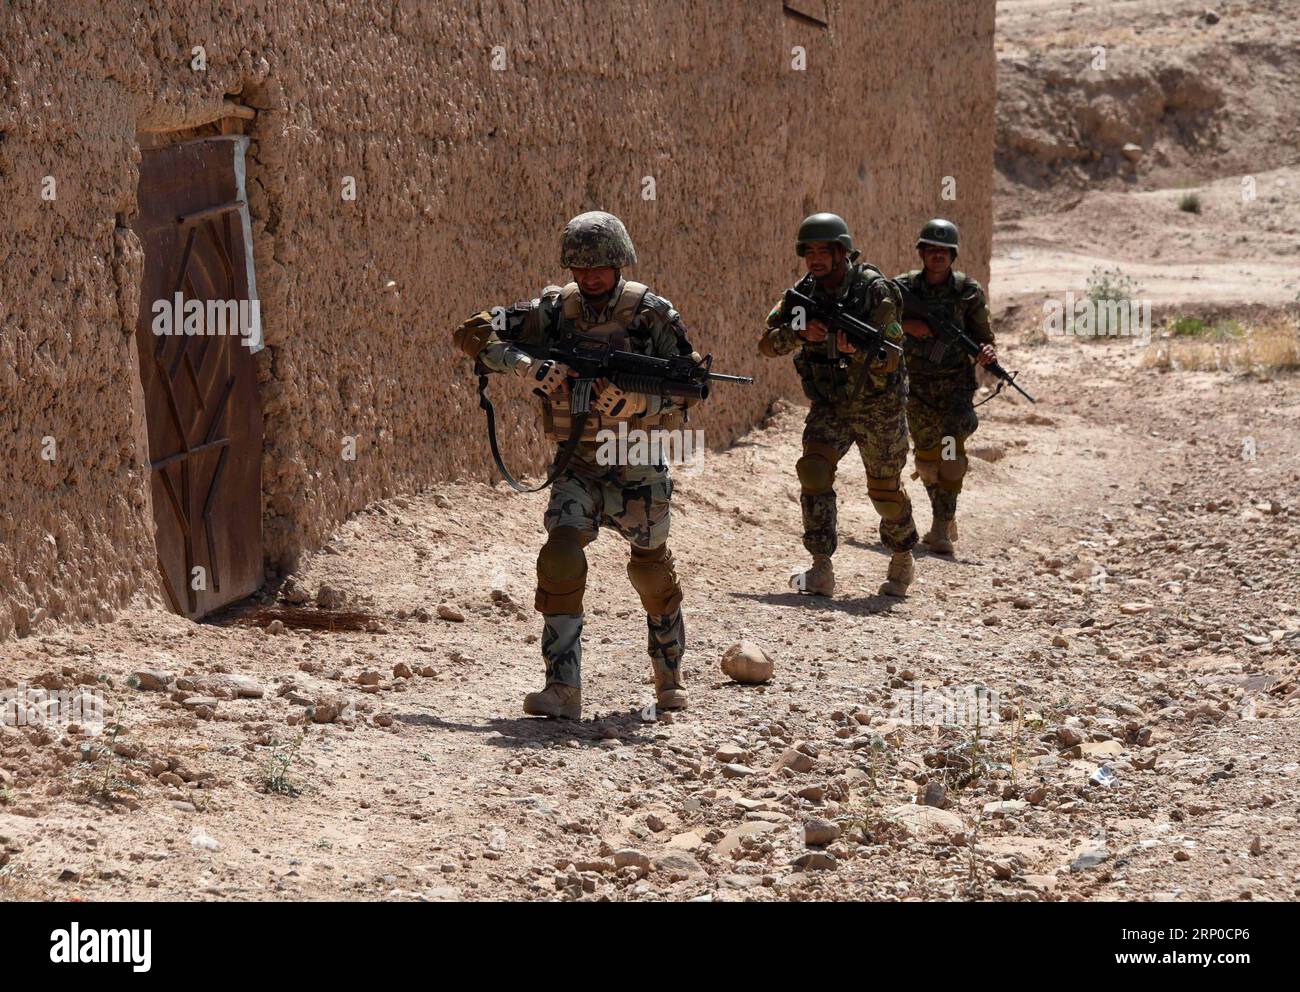 (180506) -- TIRIN KOT, May 6, 2018 -- Afghan security force members take part in a military operation in Tirin Kot, capital of Uruzgan province, Afghanistan, May 5, 2018. ) (wtc) AFGHANISTAN-URUZGAN-MILITARY OPERATION SanaullahxSeiam PUBLICATIONxNOTxINxCHN Stock Photo